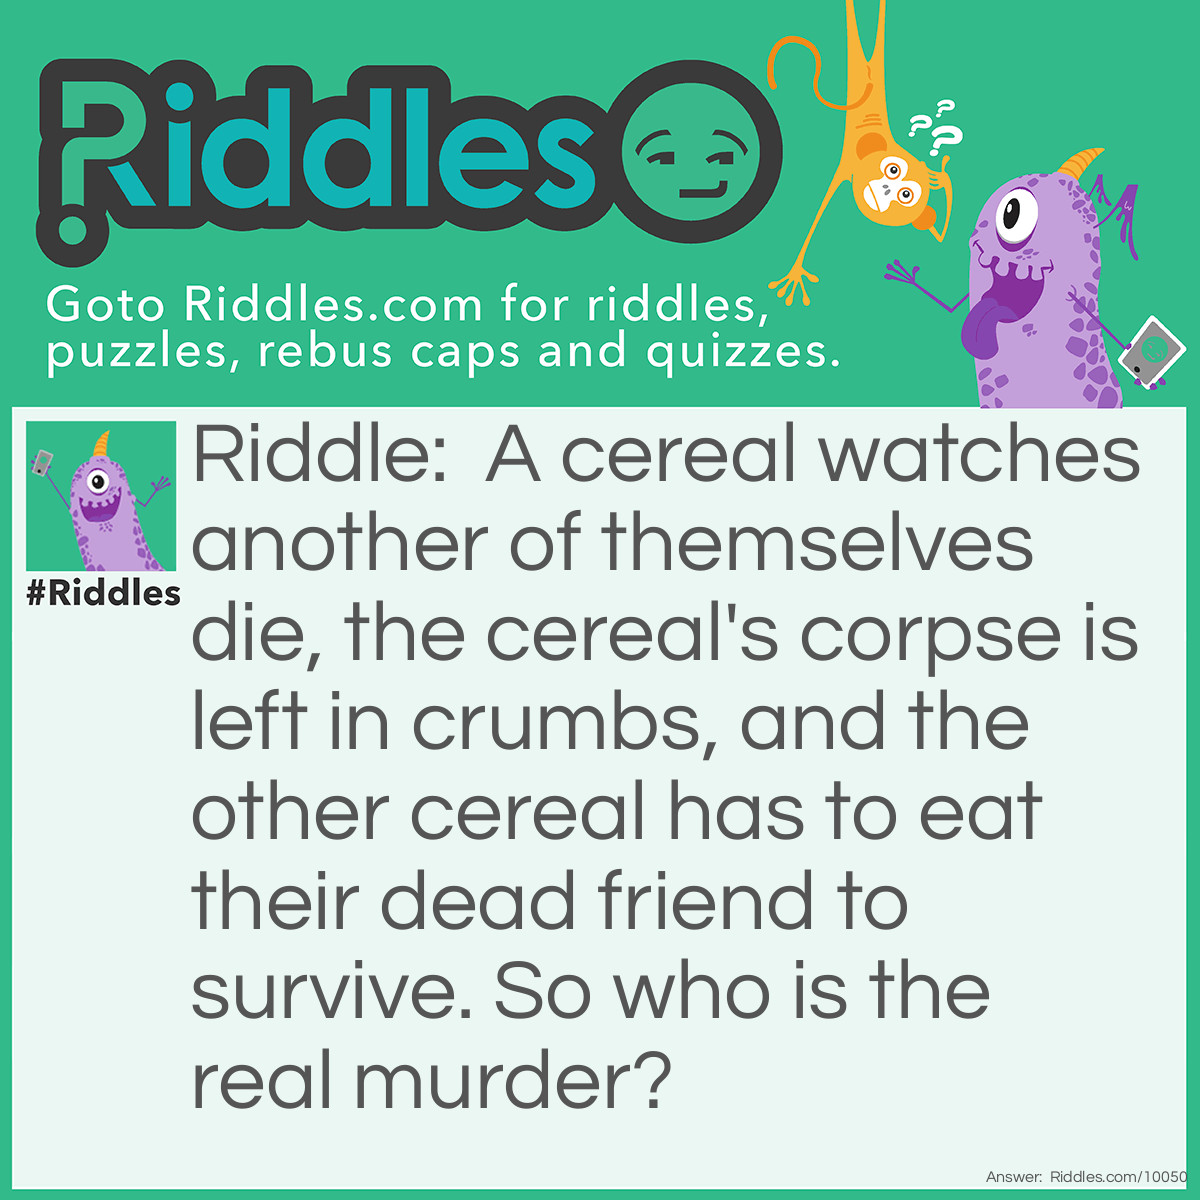 Riddle: A cereal watches another of themselves die, the cereal's corpse is left in crumbs, and the other cereal has to eat their dead friend to survive. So who is the real murder? Answer: It's the person who ate the cereal, cereal can move but not eat, so everything I said about the cereal eating the crumbs is all lies.